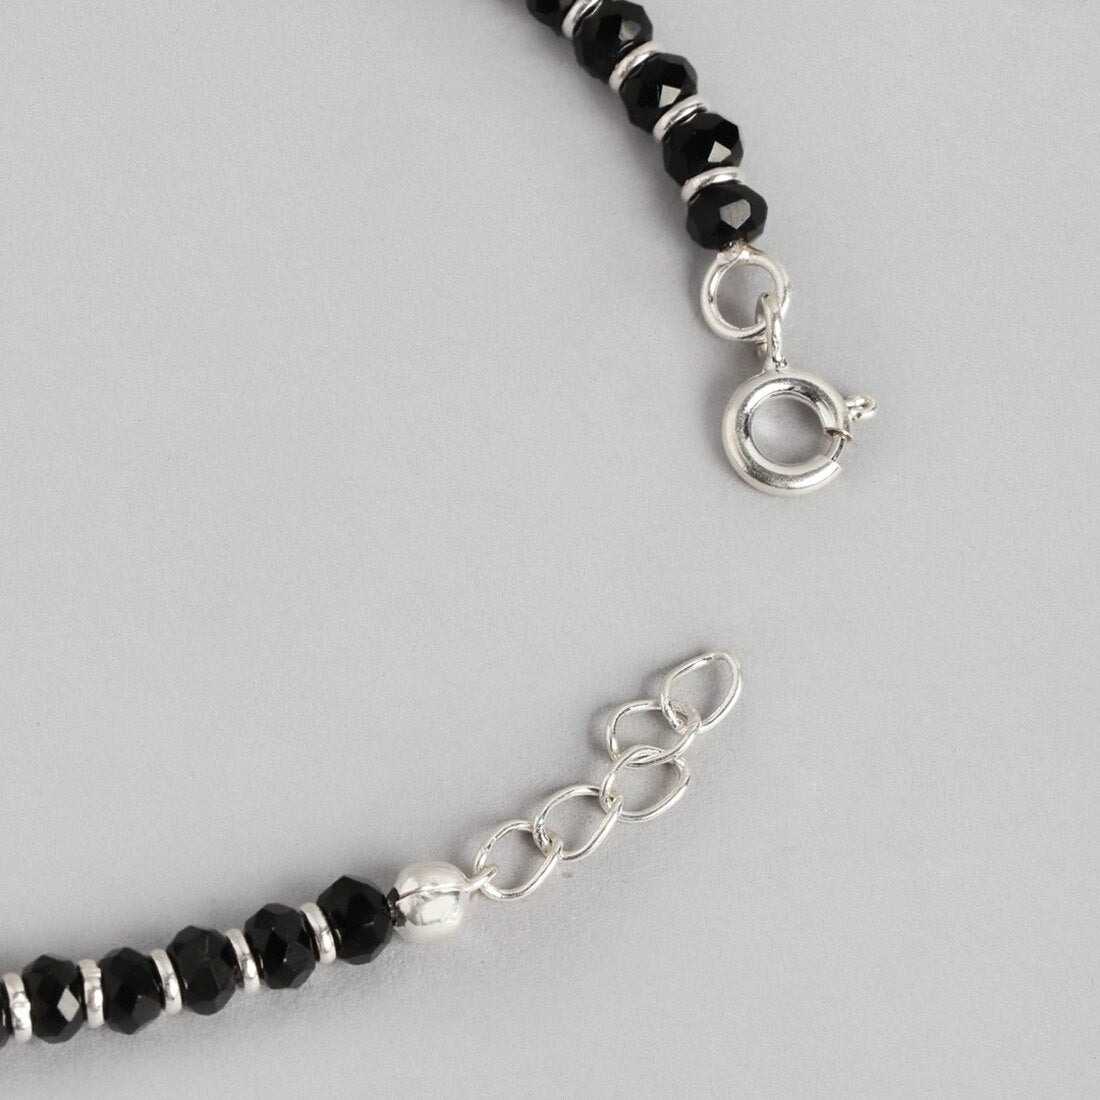 Mystic Allure 925 Sterling Silver Rhodium-Plated Anklet